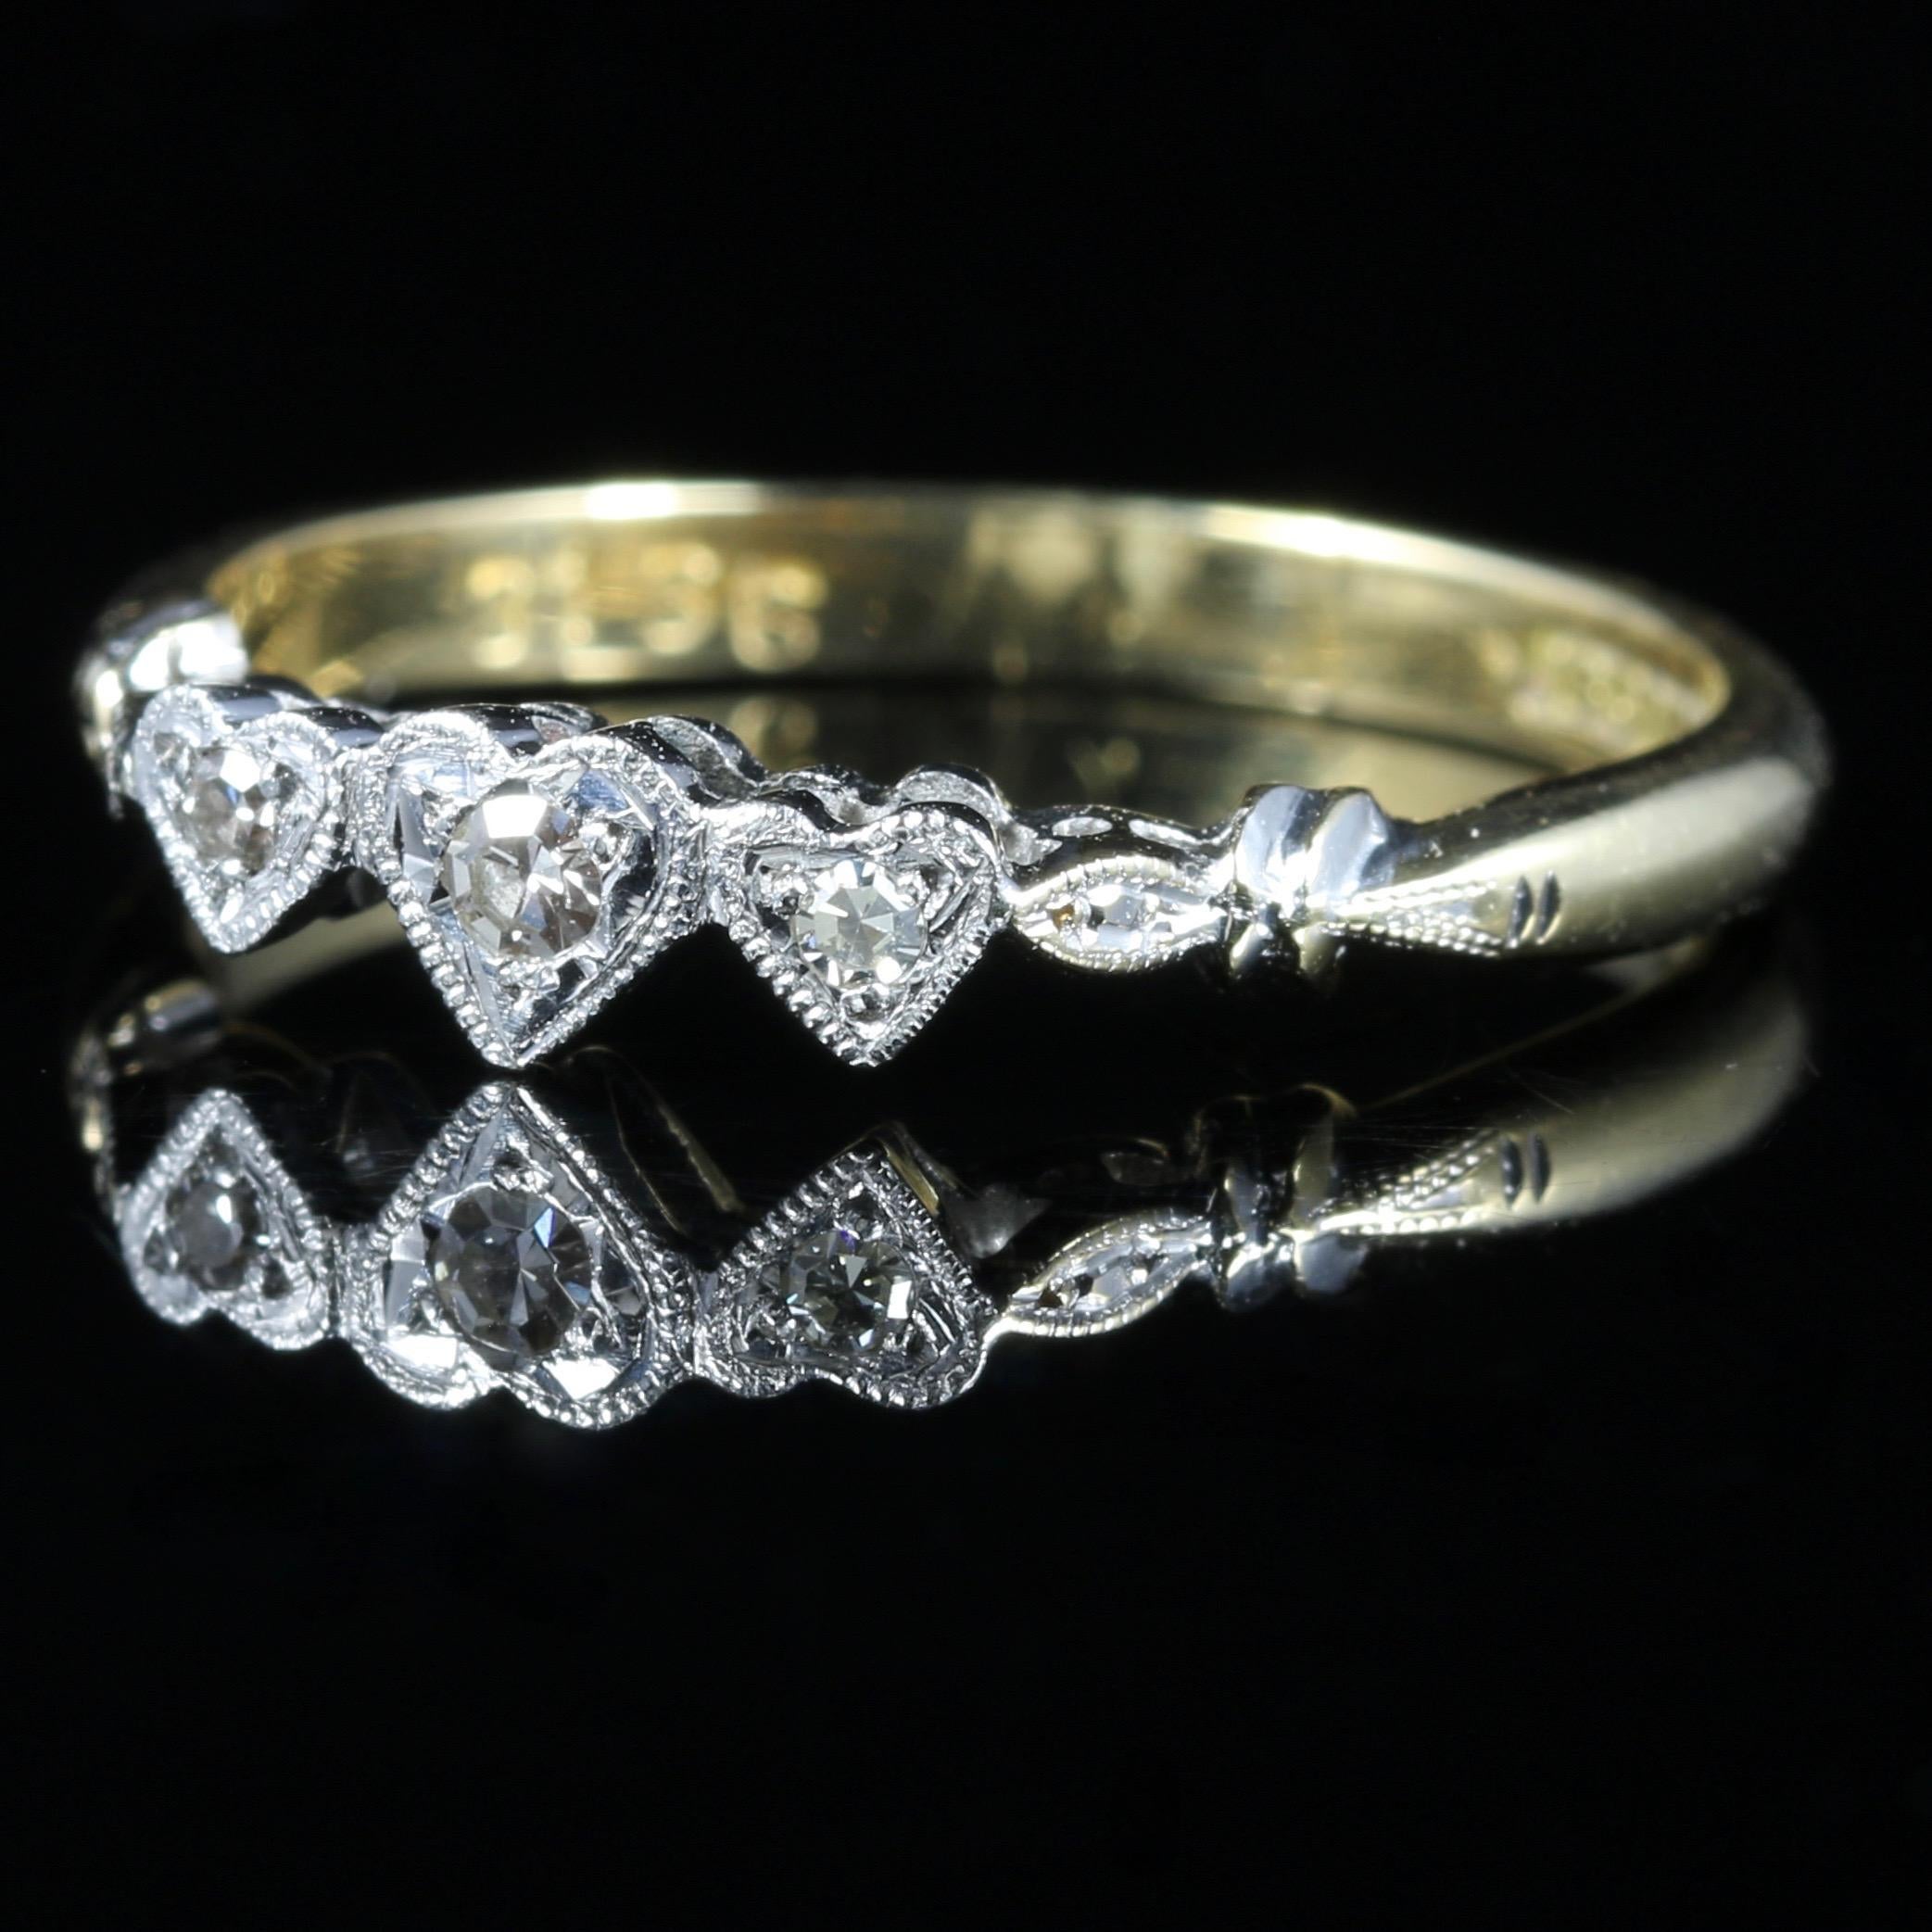 For more details please click continue reading down below...

This fabulous antique Edwardian triple Diamond heart ring is Circa 1915.

Crowned with 3 sparkling Diamonds in a heart shape gallery.

Smaller Diamonds also chase down the